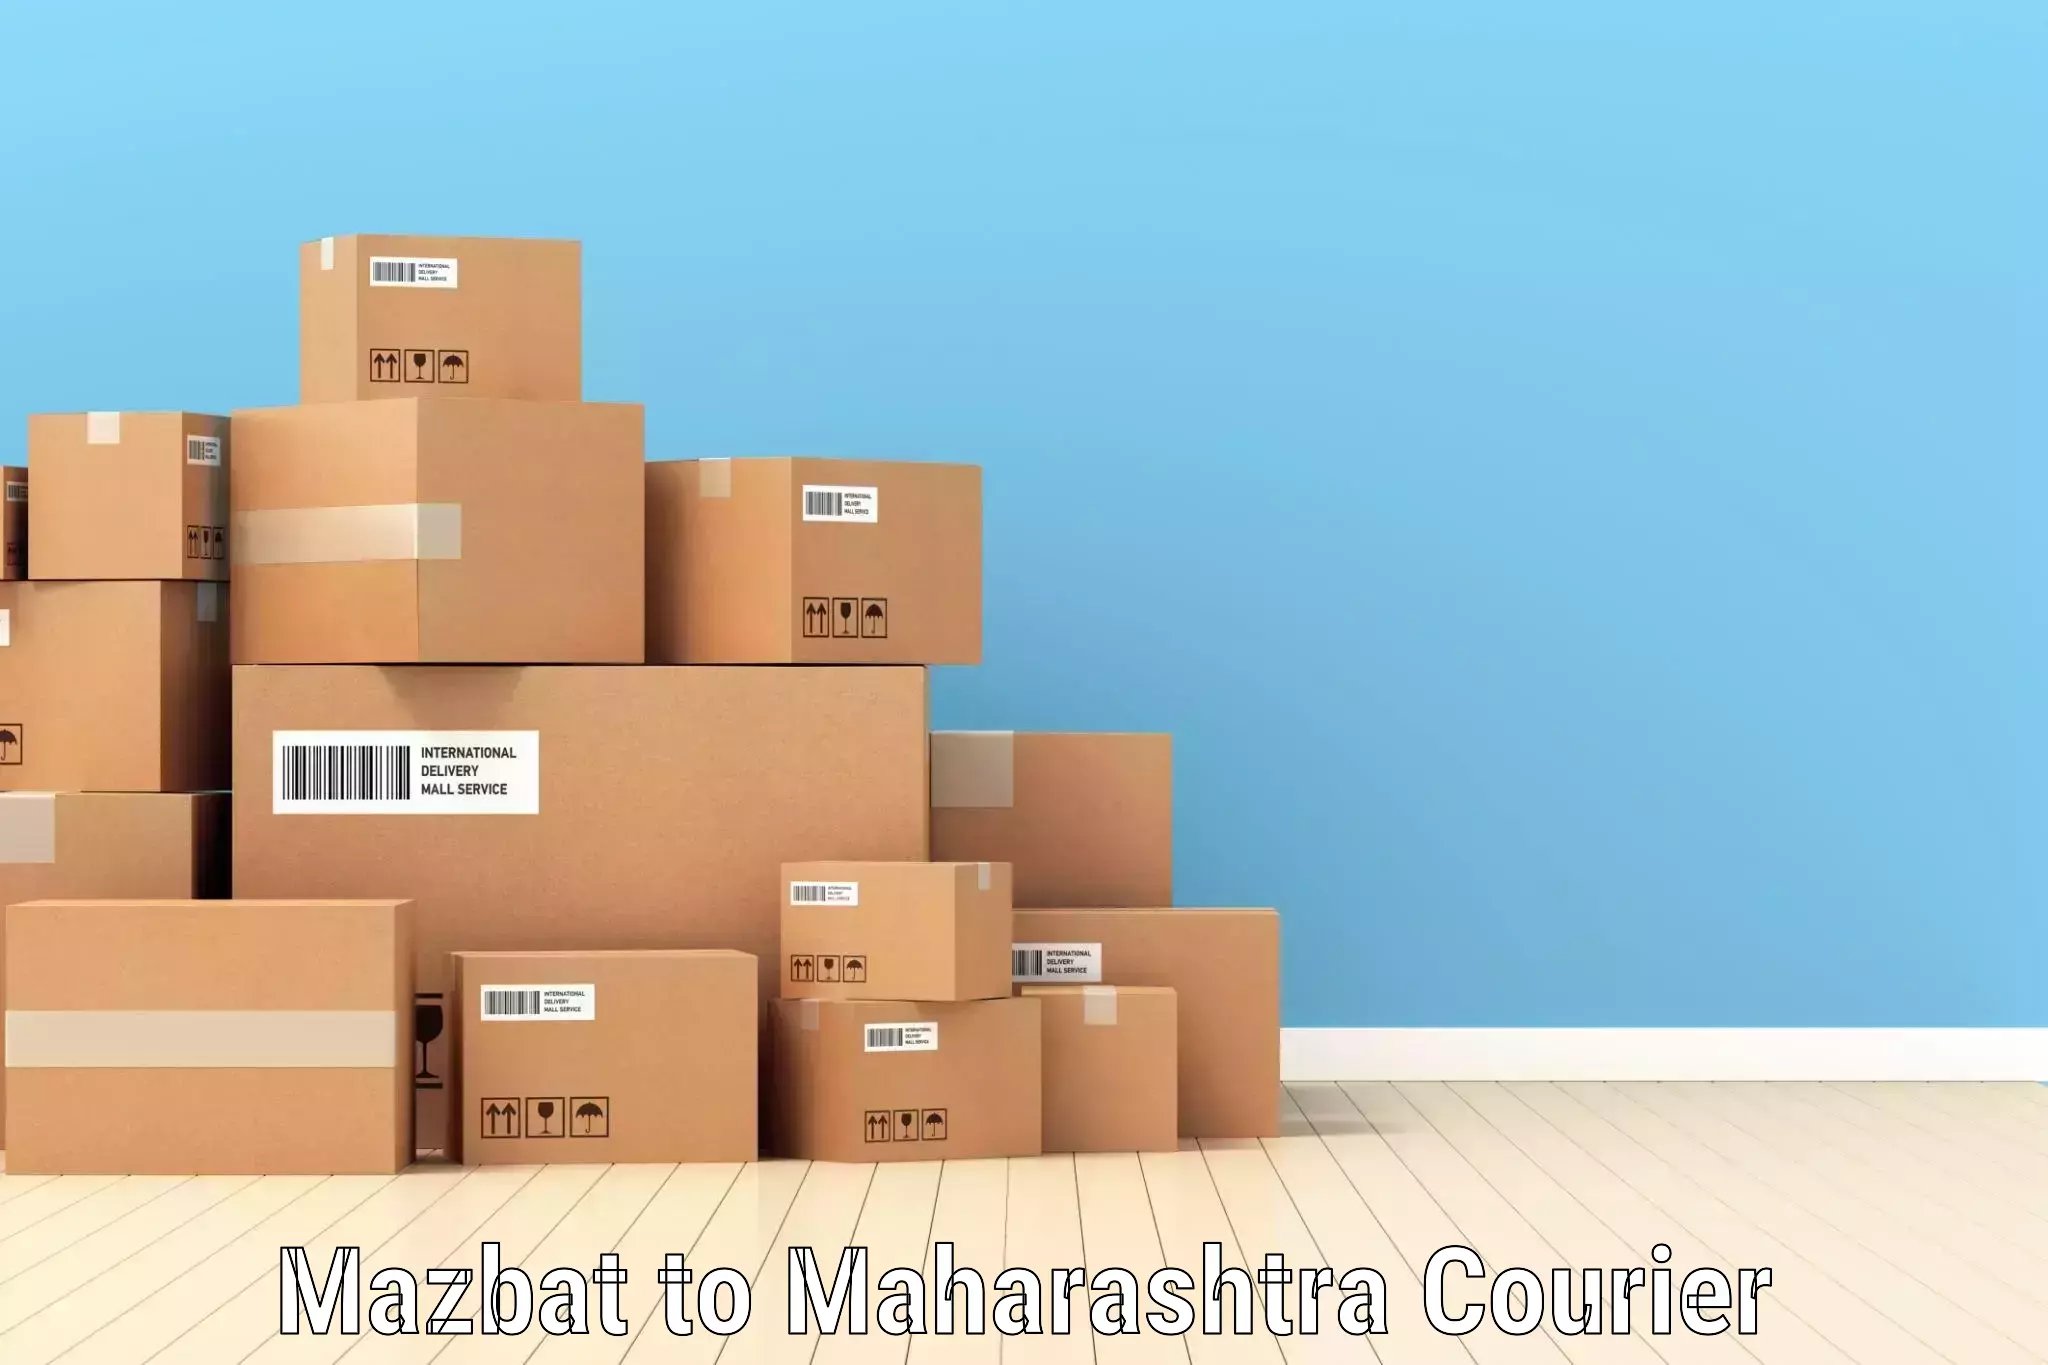 Efficient package consolidation in Mazbat to Oras